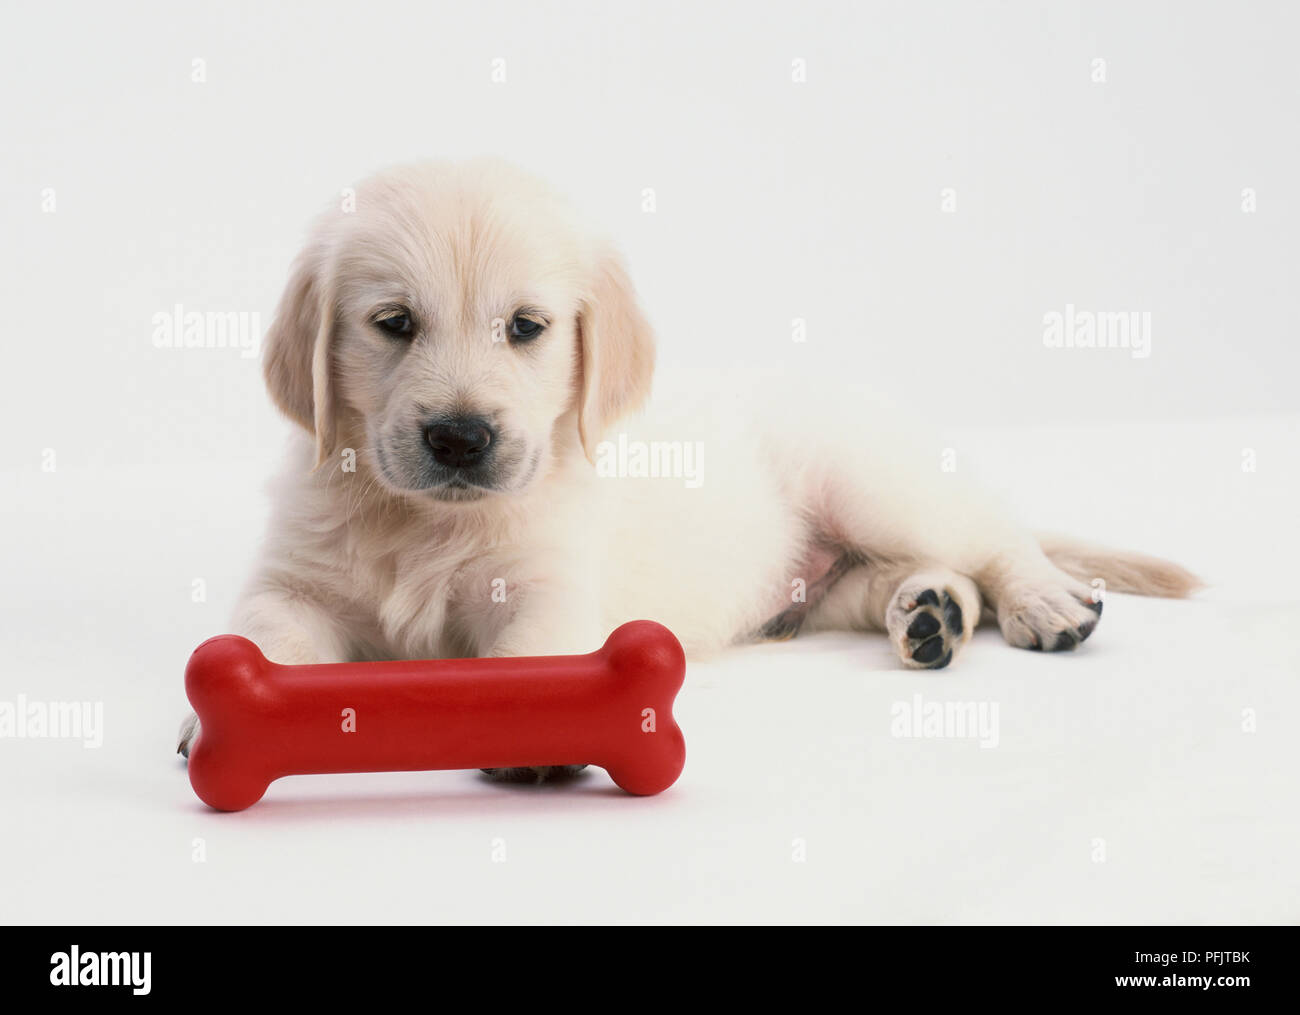 Retriever puppy lying in front of red toy bone, front view Stock Photo